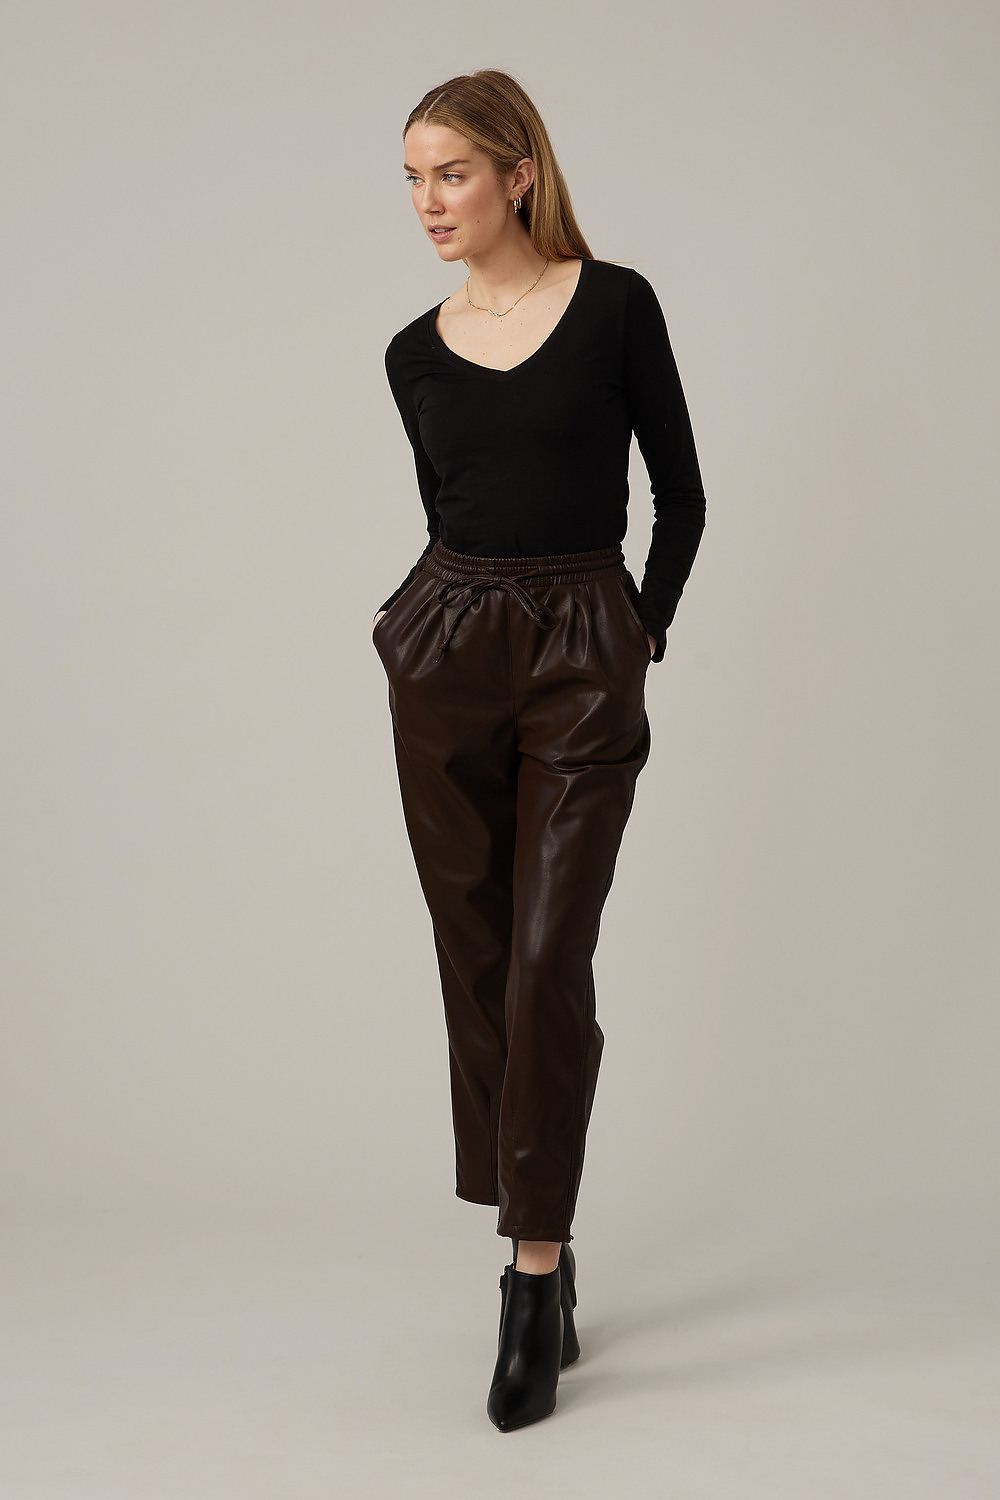 Emproved Vegan Leather Elastic Waist Pants Style A2260. Chocolate